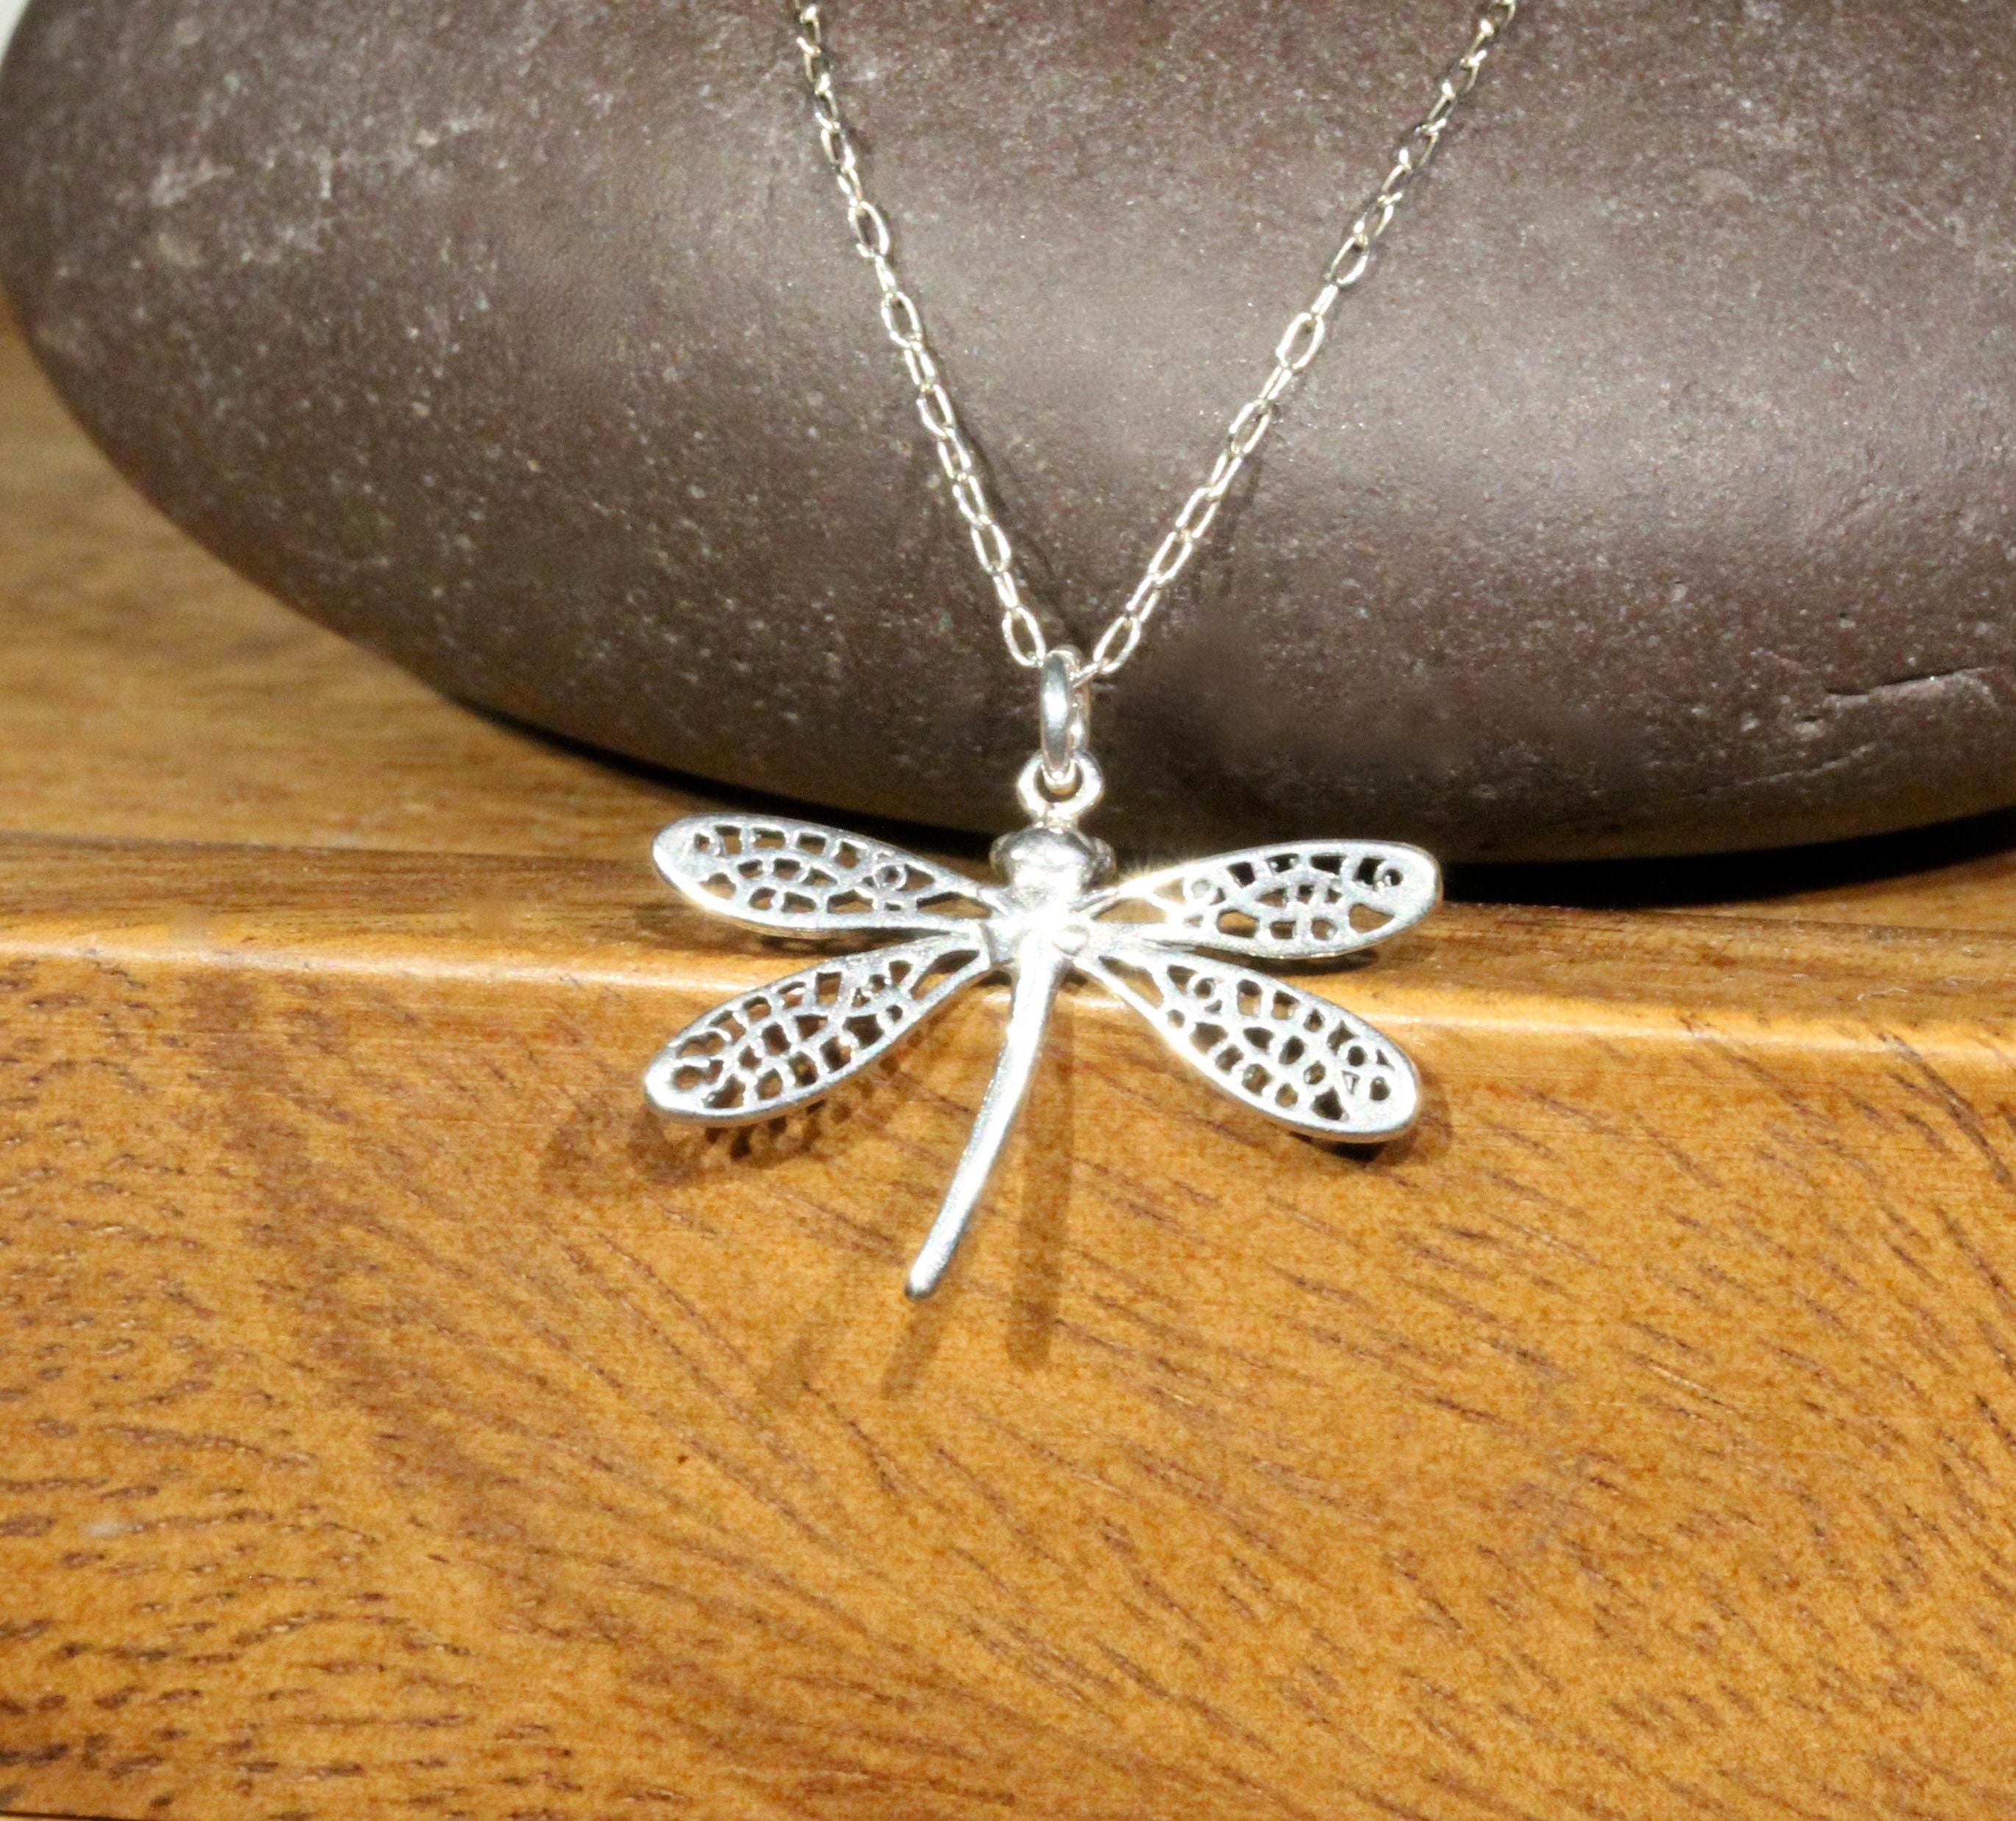 Dragonfly necklace, bug necklace, dragonfly pendant necklace, sterling ...